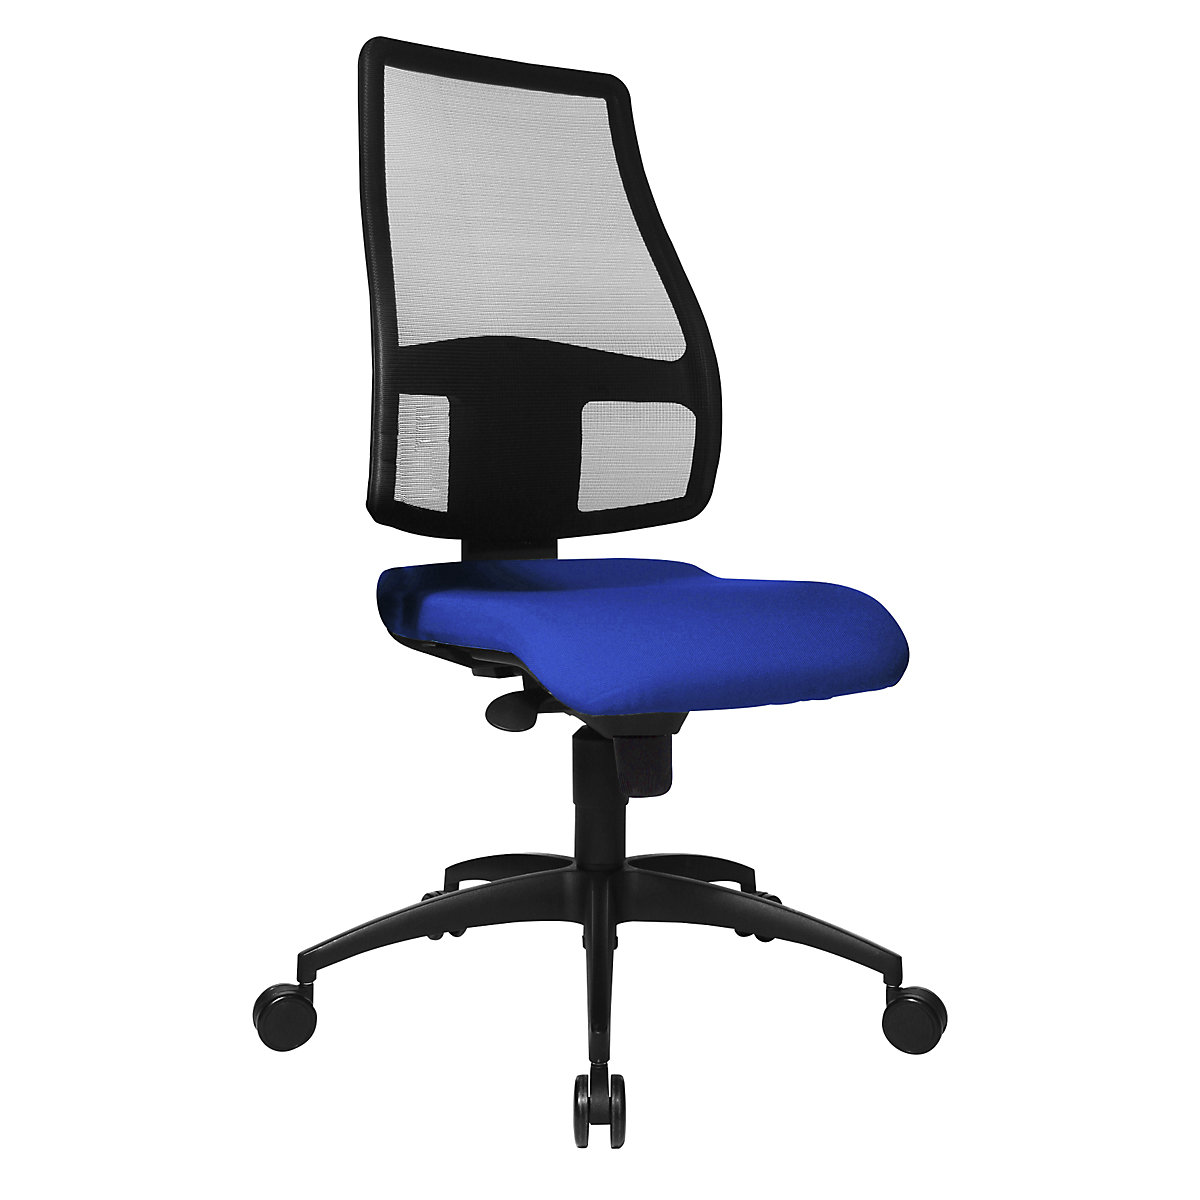 Ergonomic swivel chair, back rest height 680 mm – Topstar, back rest with actively breathing mesh covering, royal blue seat cover-2